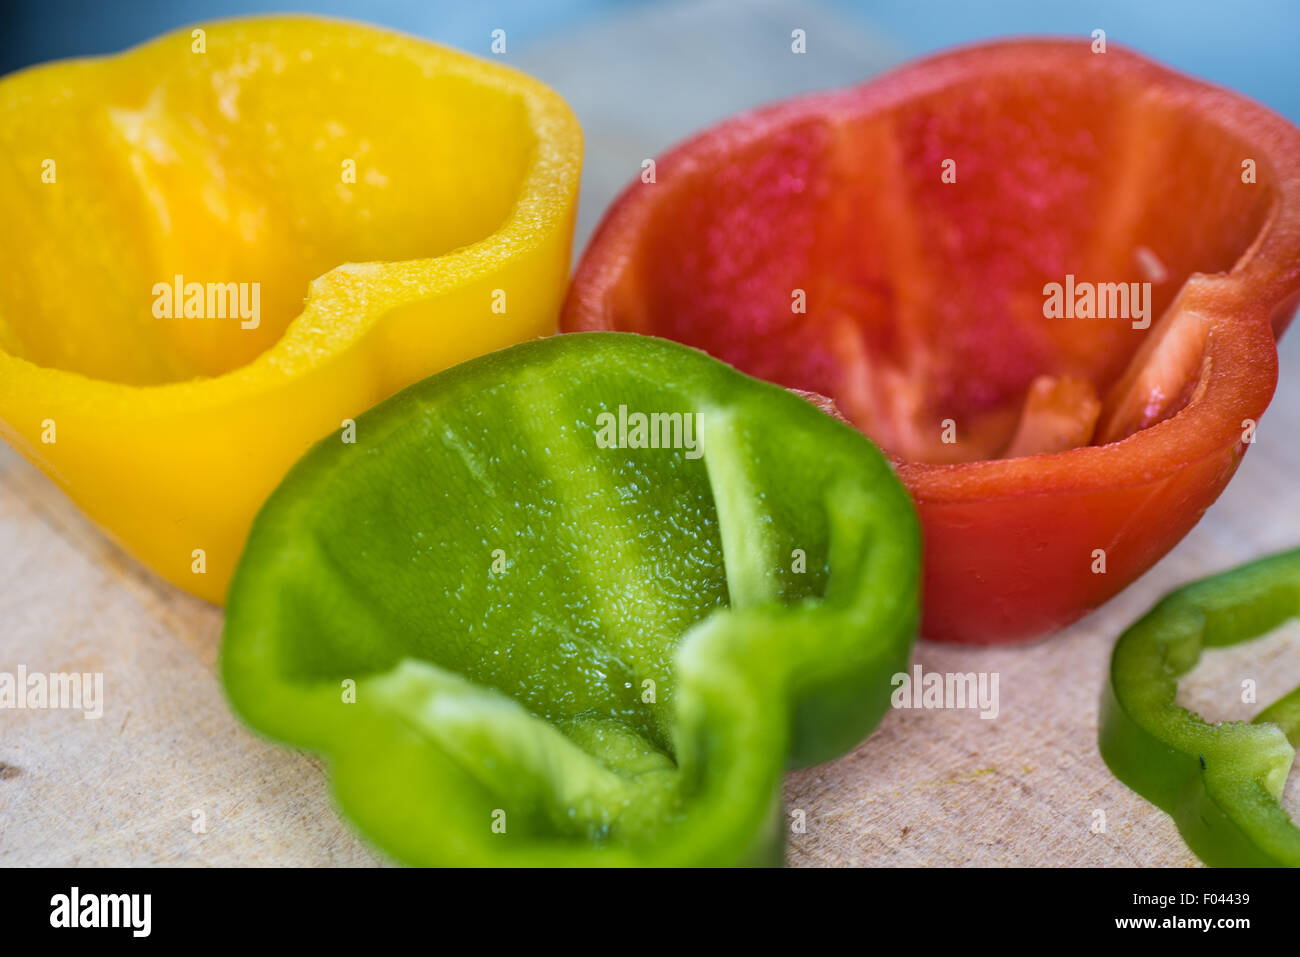 A green, yellow and red pepper being prepared Stock Photo